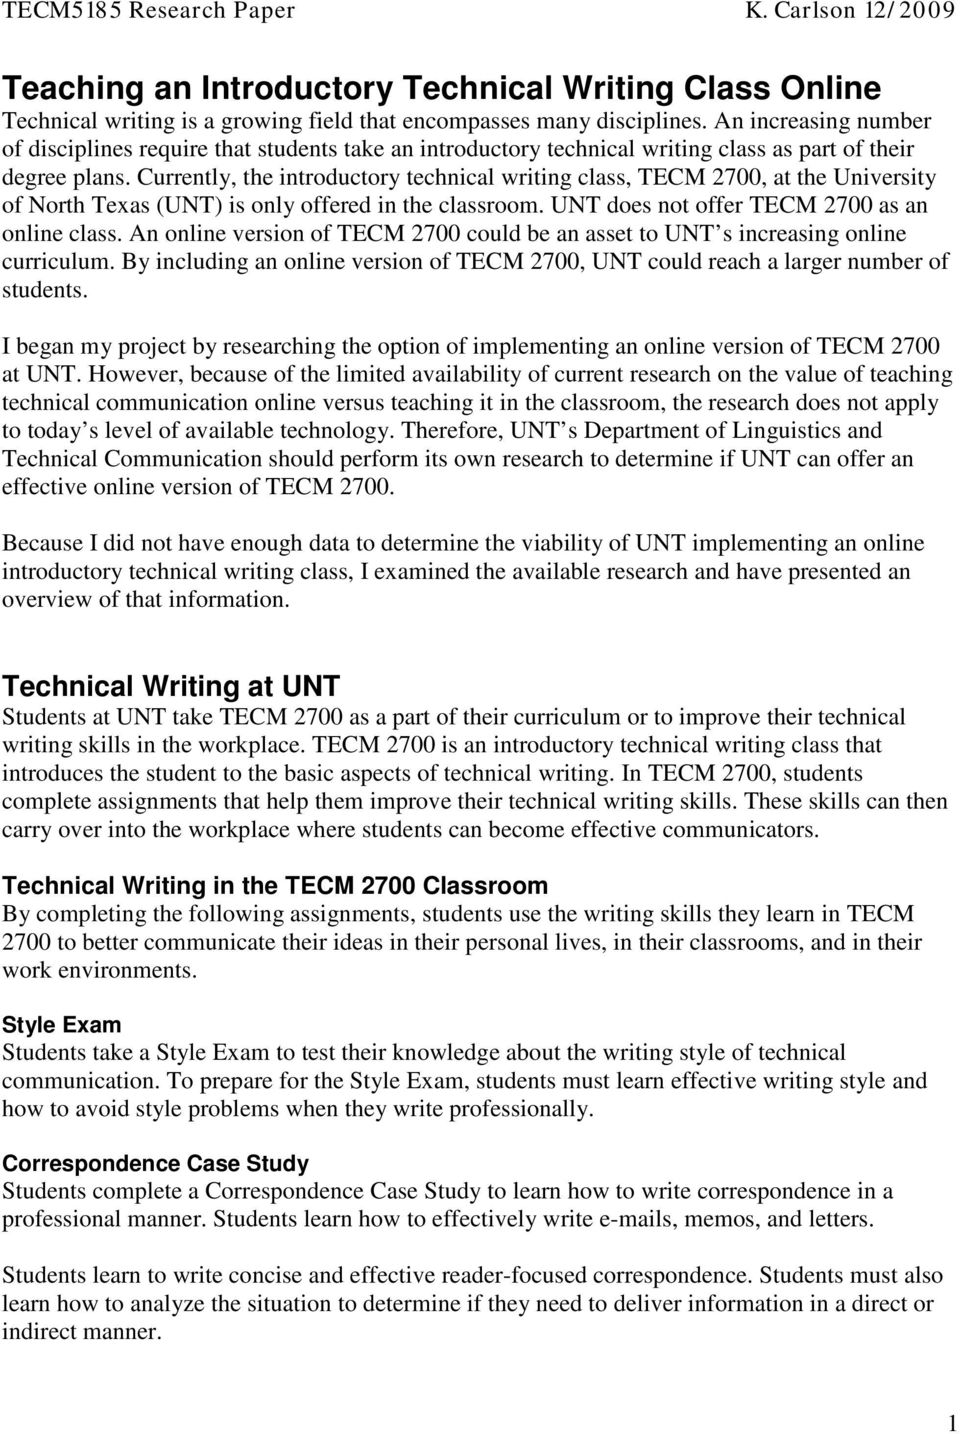 Currently, the introductory technical writing class, TECM 2700, at the University of North Texas (UNT) is only offered in the classroom. UNT does not offer TECM 2700 as an online class.